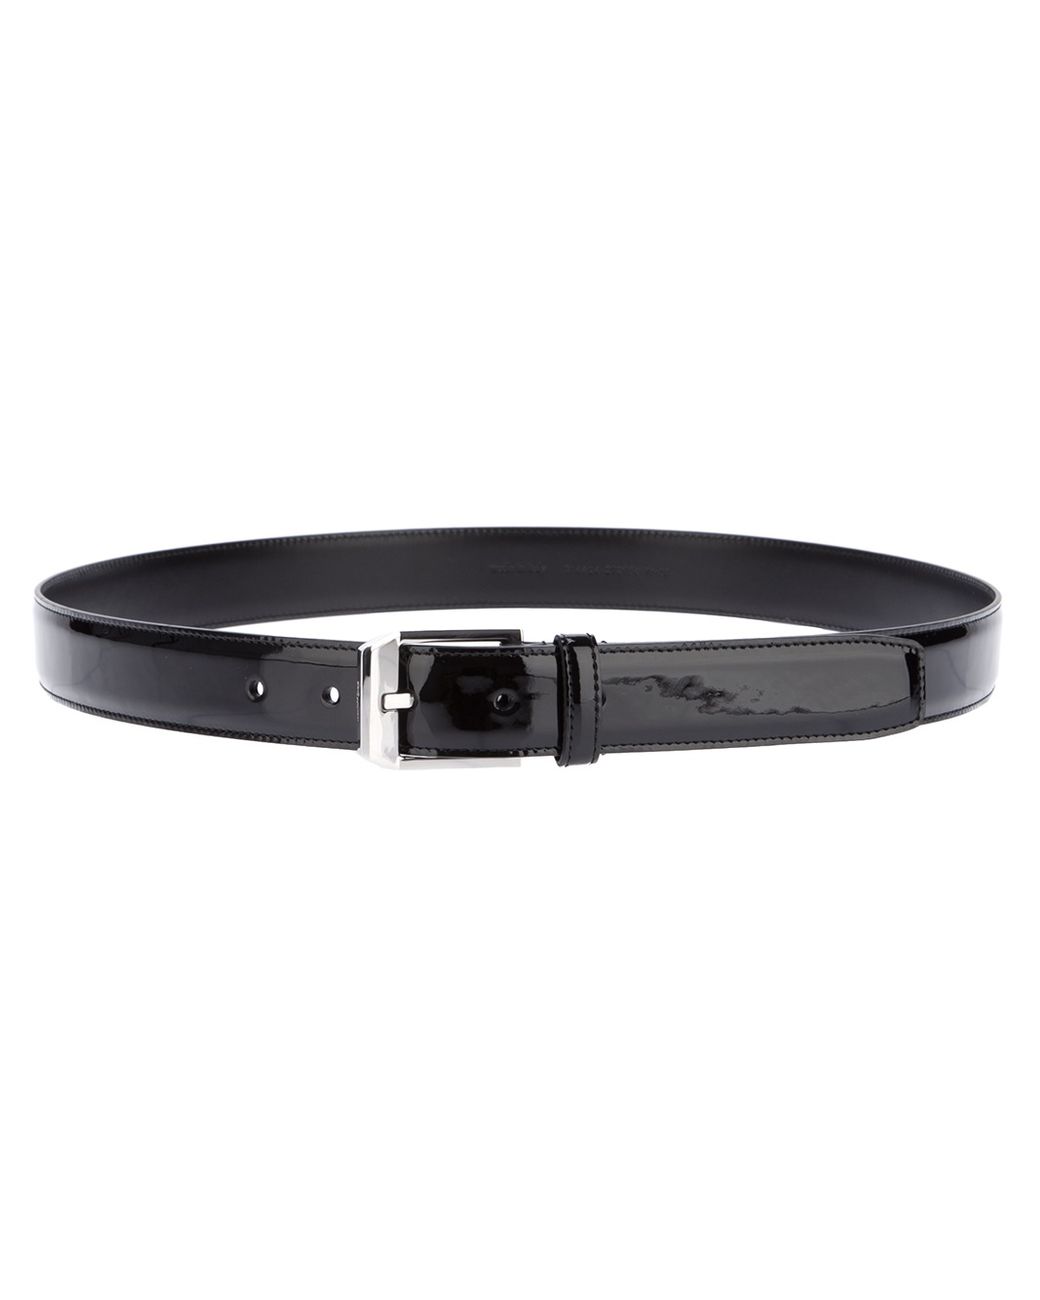 Patent leather belt Yves Saint Laurent Black size 33 Inches in